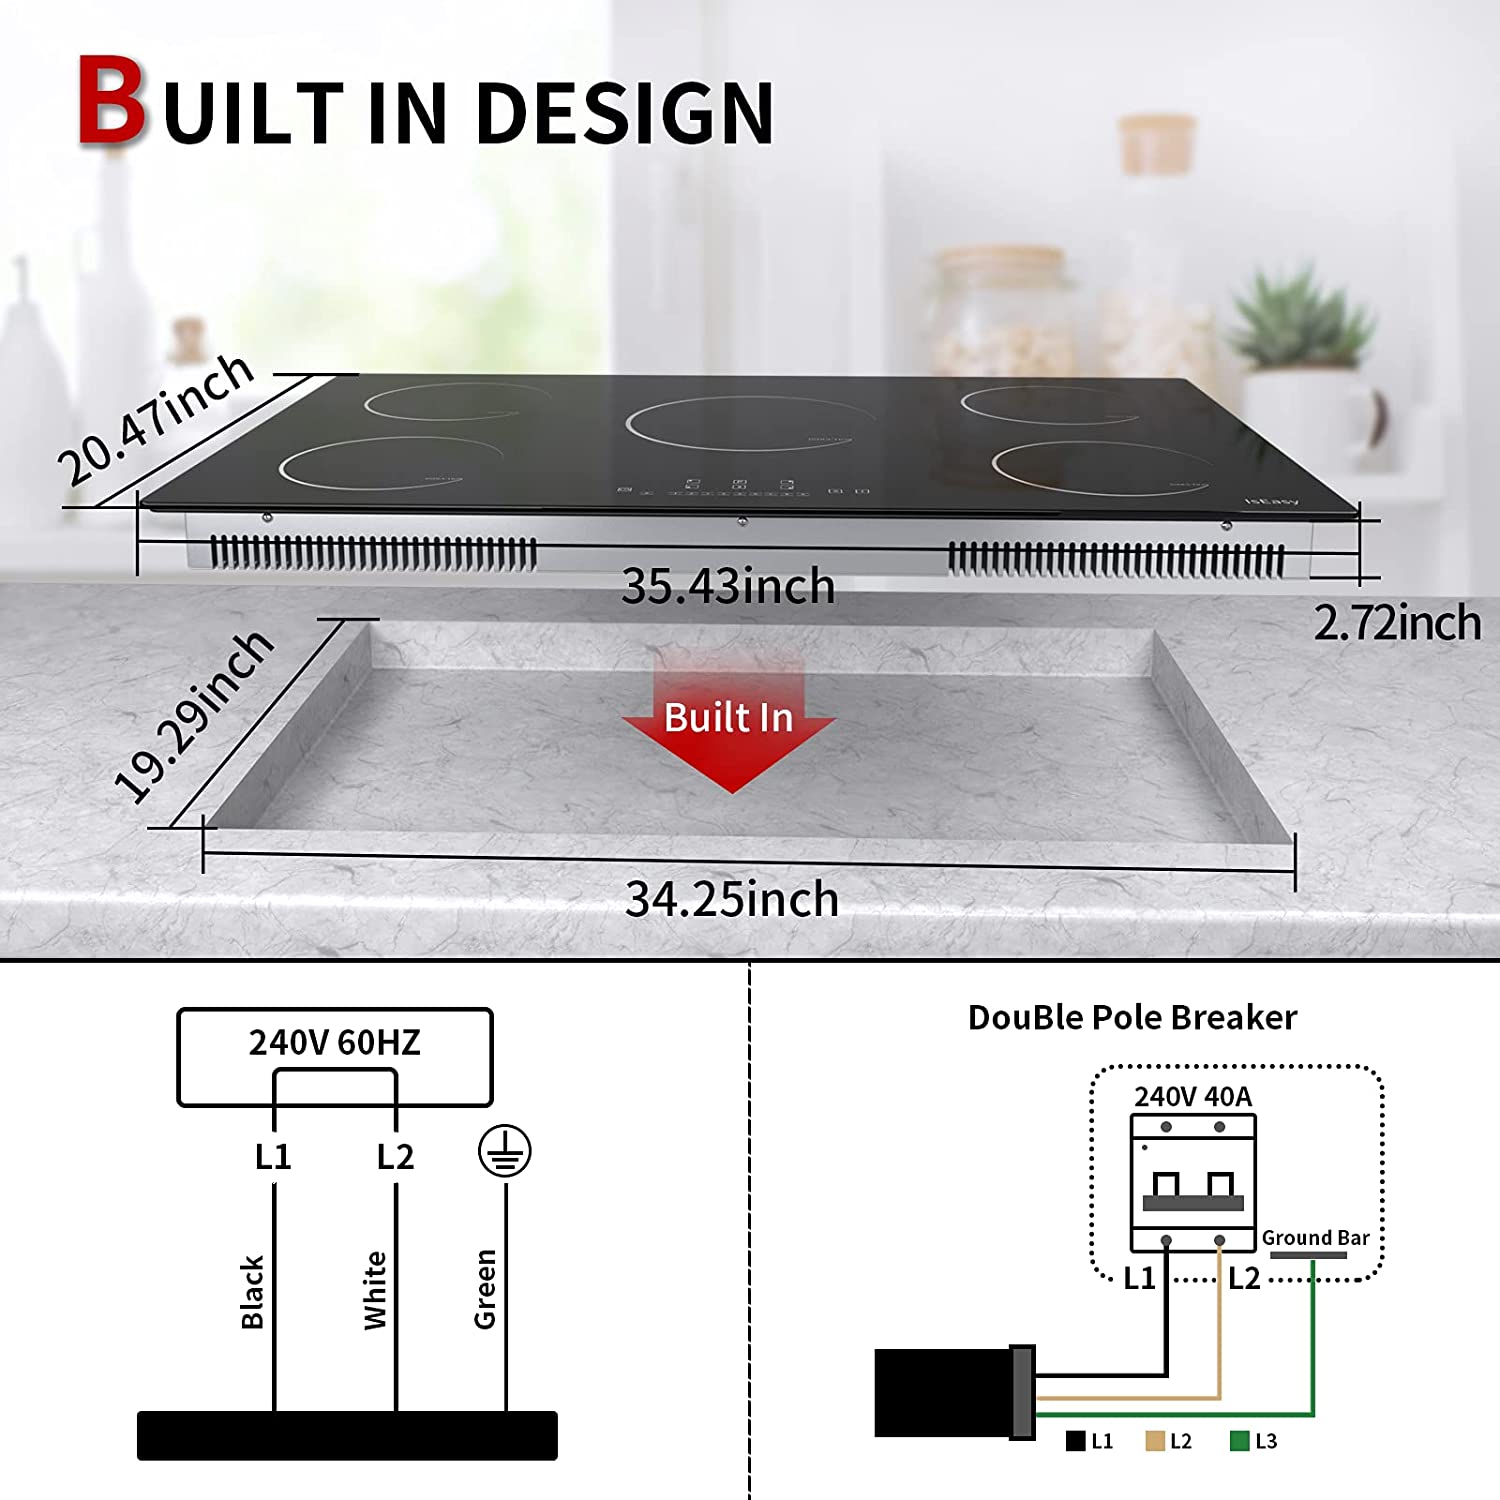 36 Inch Induction Cooktop,  IsEasy electric cooktop 5 Burners, 8600W, Built-in Induction Hob Stove Smoothtop Cooker, Timer, Touch Control, 9 Heating Levels, Booster Function, Glass Black Surface, Residual heat indicator, Child Safety Lock, 220V-240V